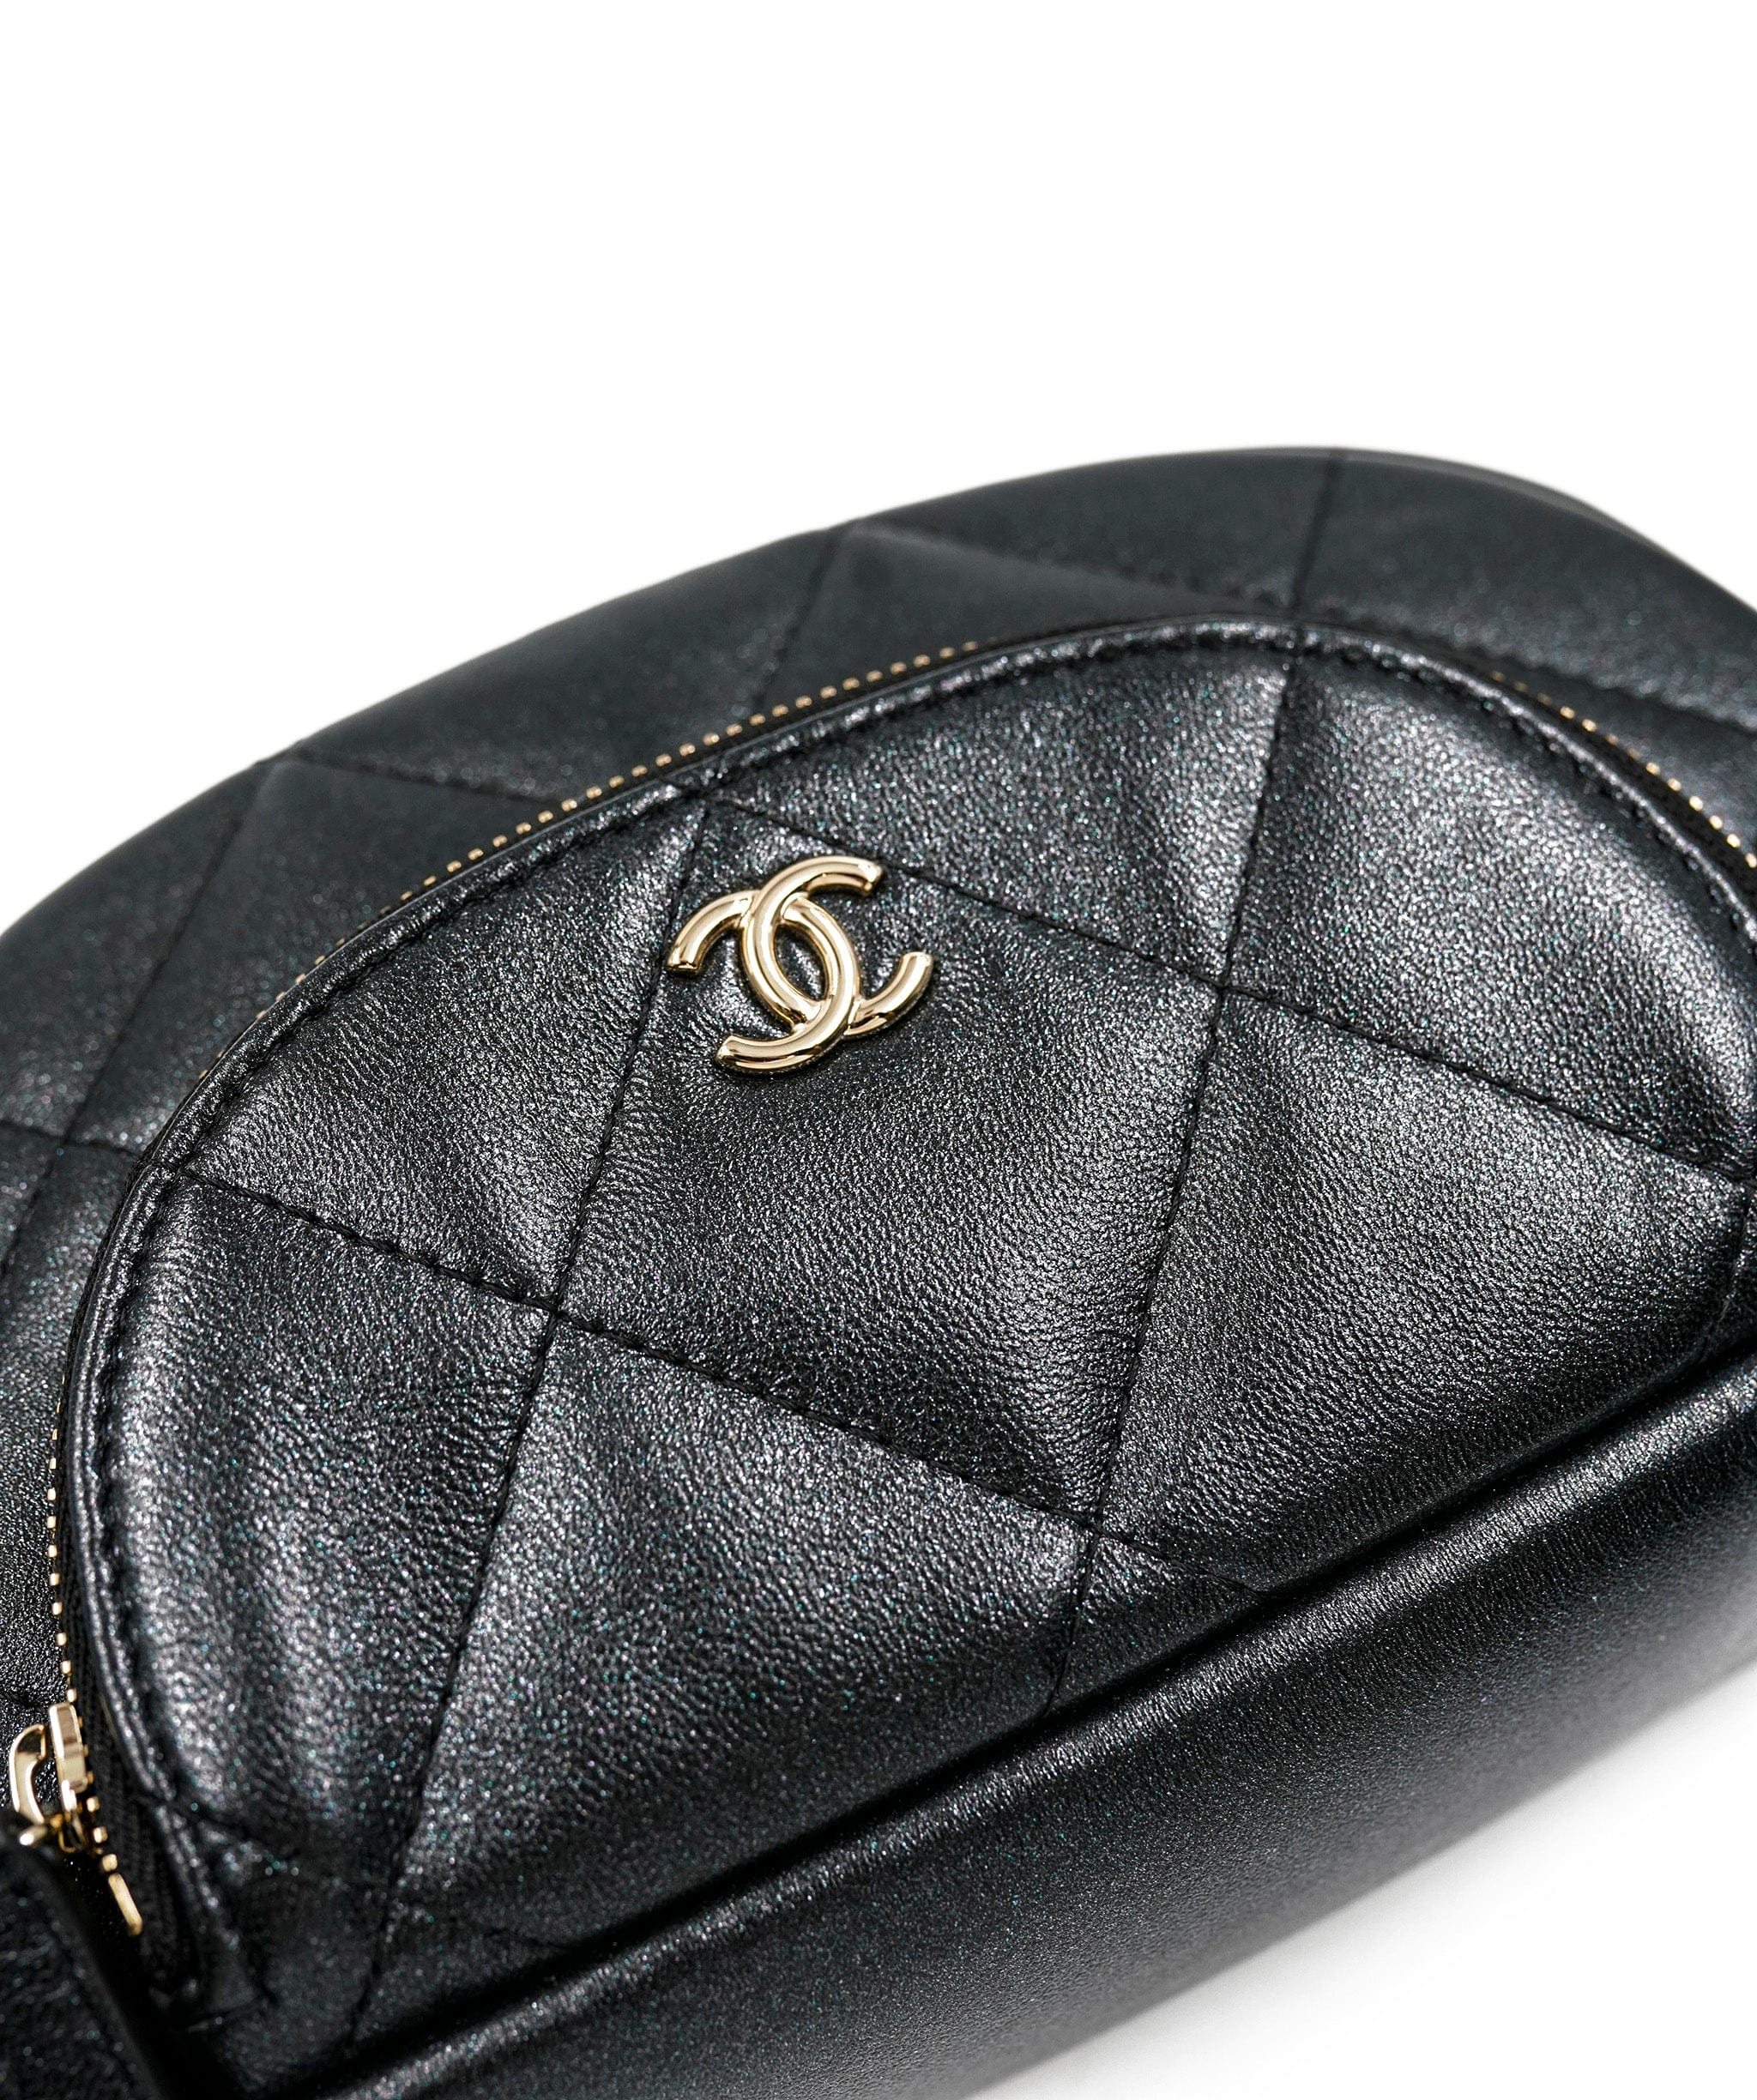 Chanel Chanel Black Iridescent Make Up Pouch ASL5270